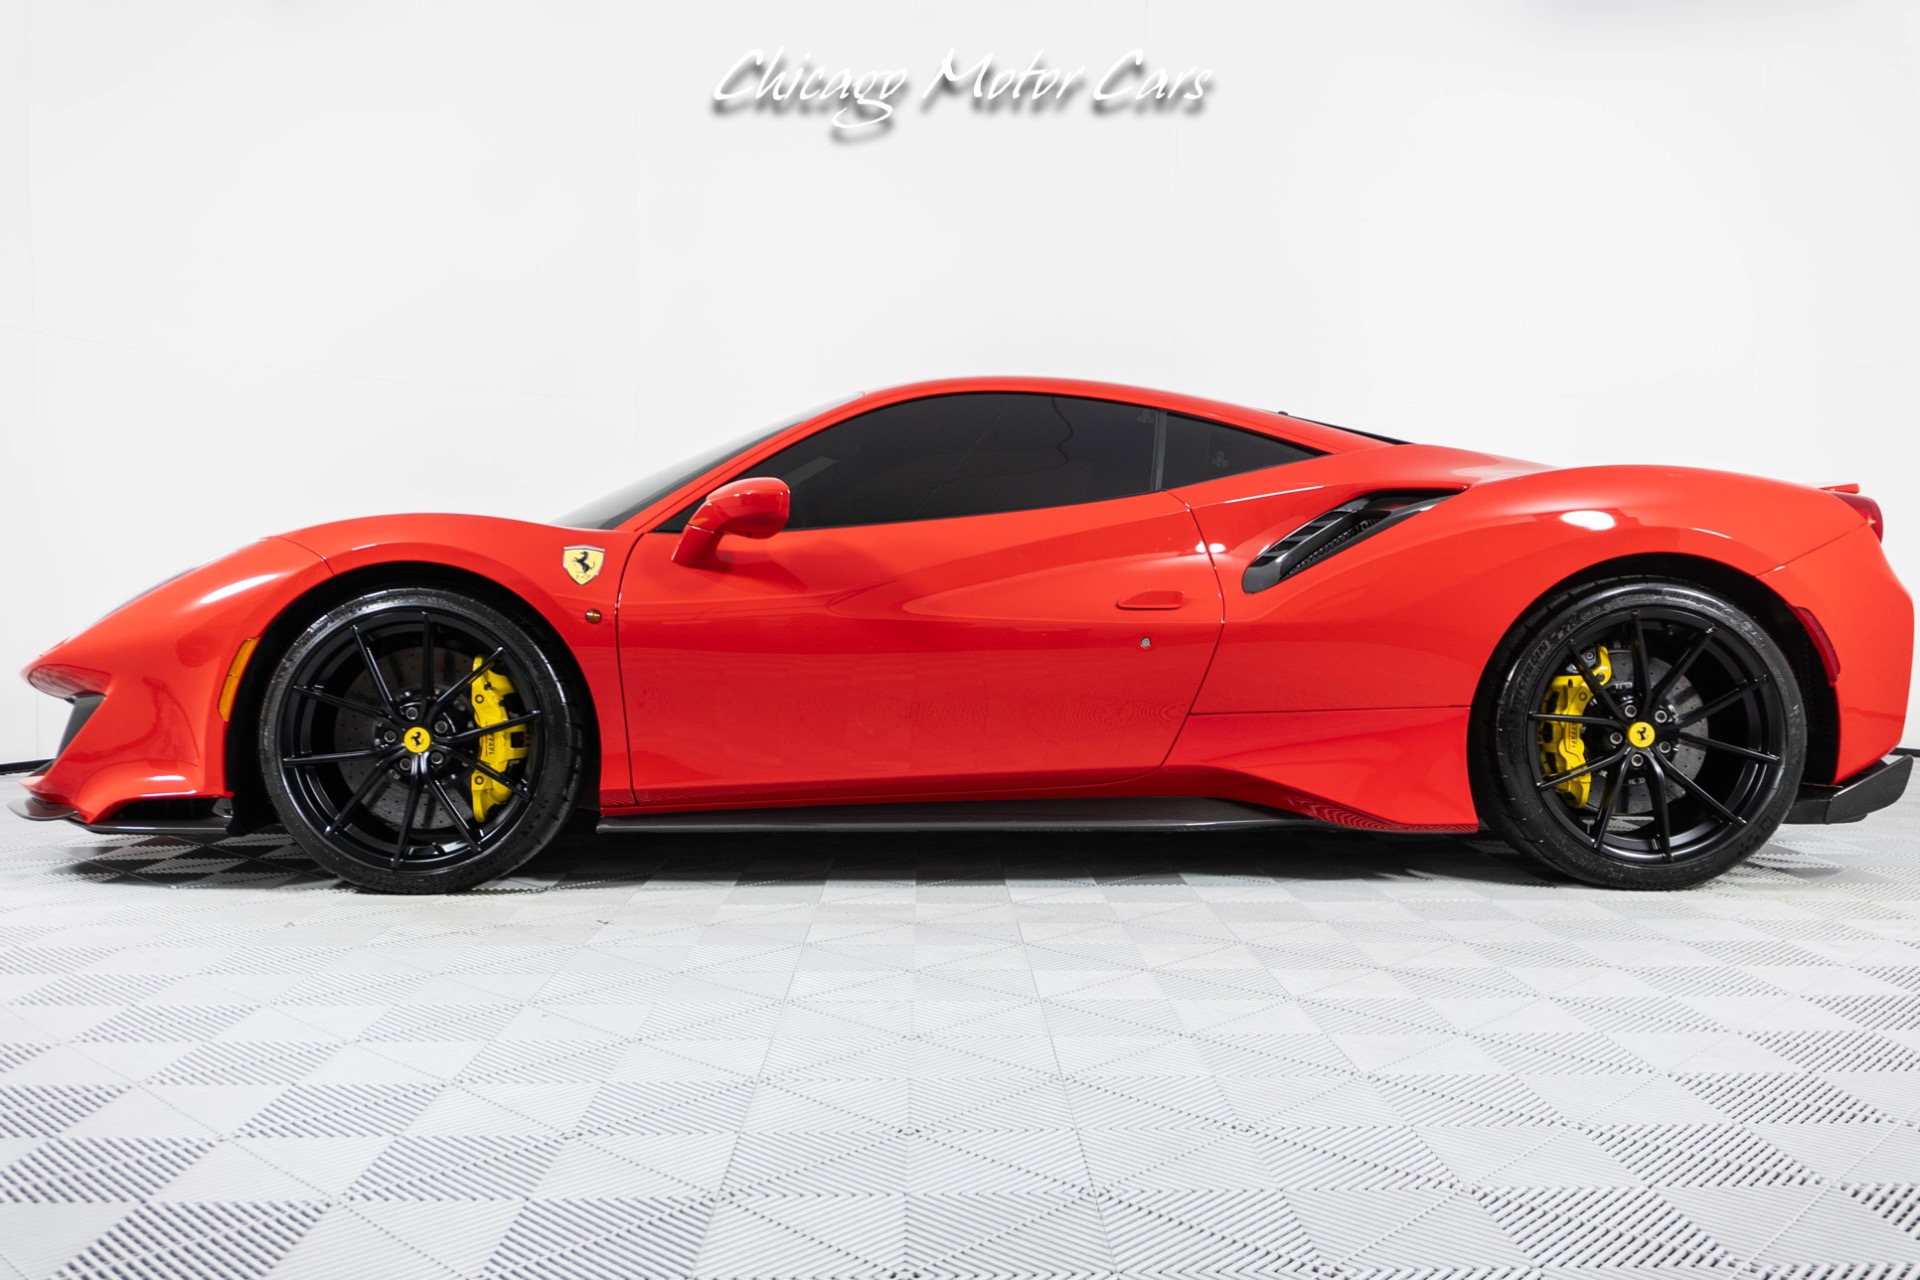 Used-2020-Ferrari-488-Pista-Only-3K-Miles-Beautiful-Spec-Full-Body-PPF-Front-End-Lifter-Loaded